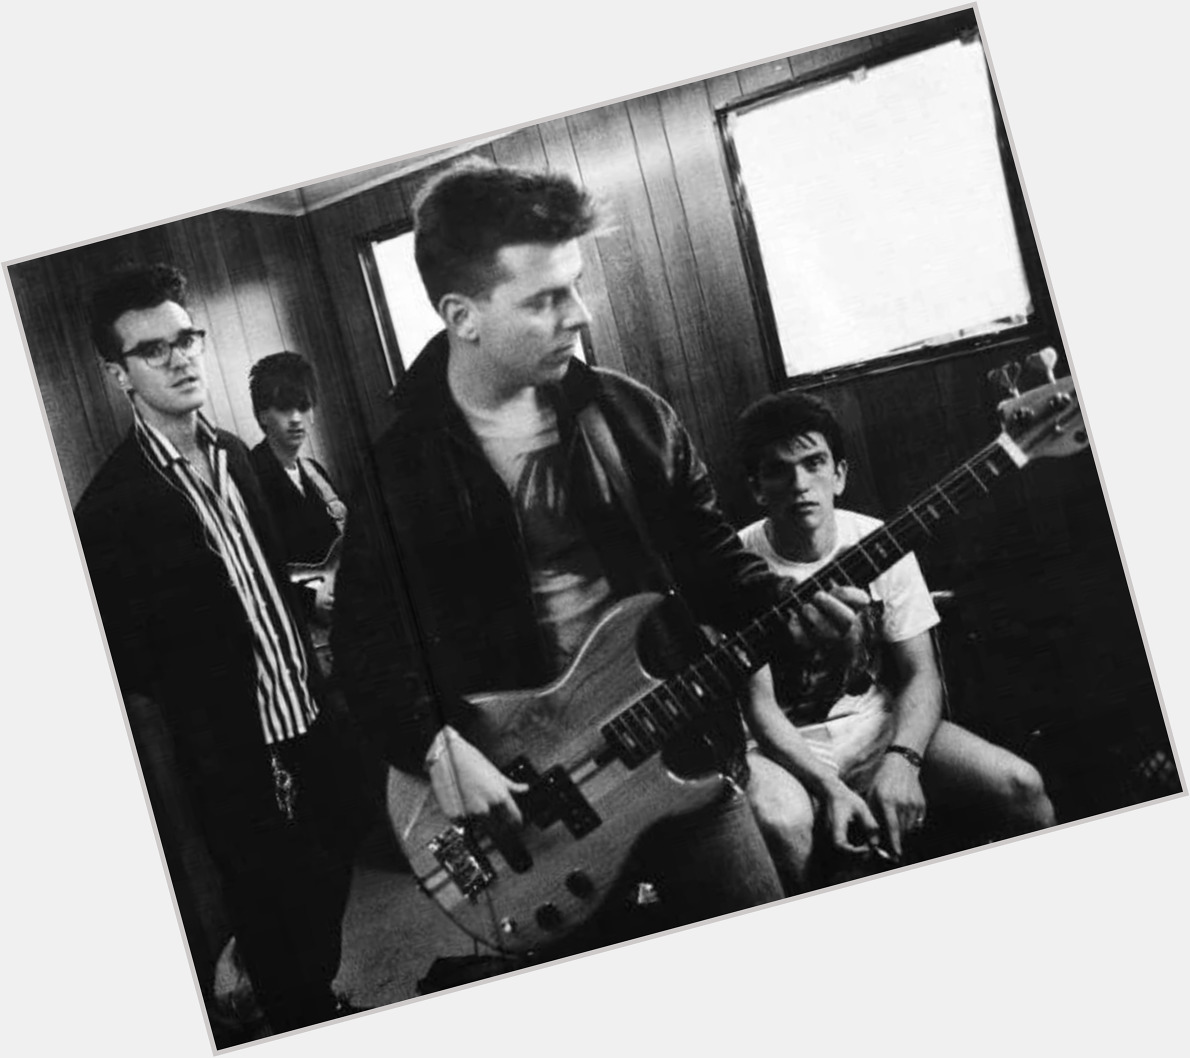 Happy birthday to Andy Rourke of The Smiths - one of the most underrated bass players in history  